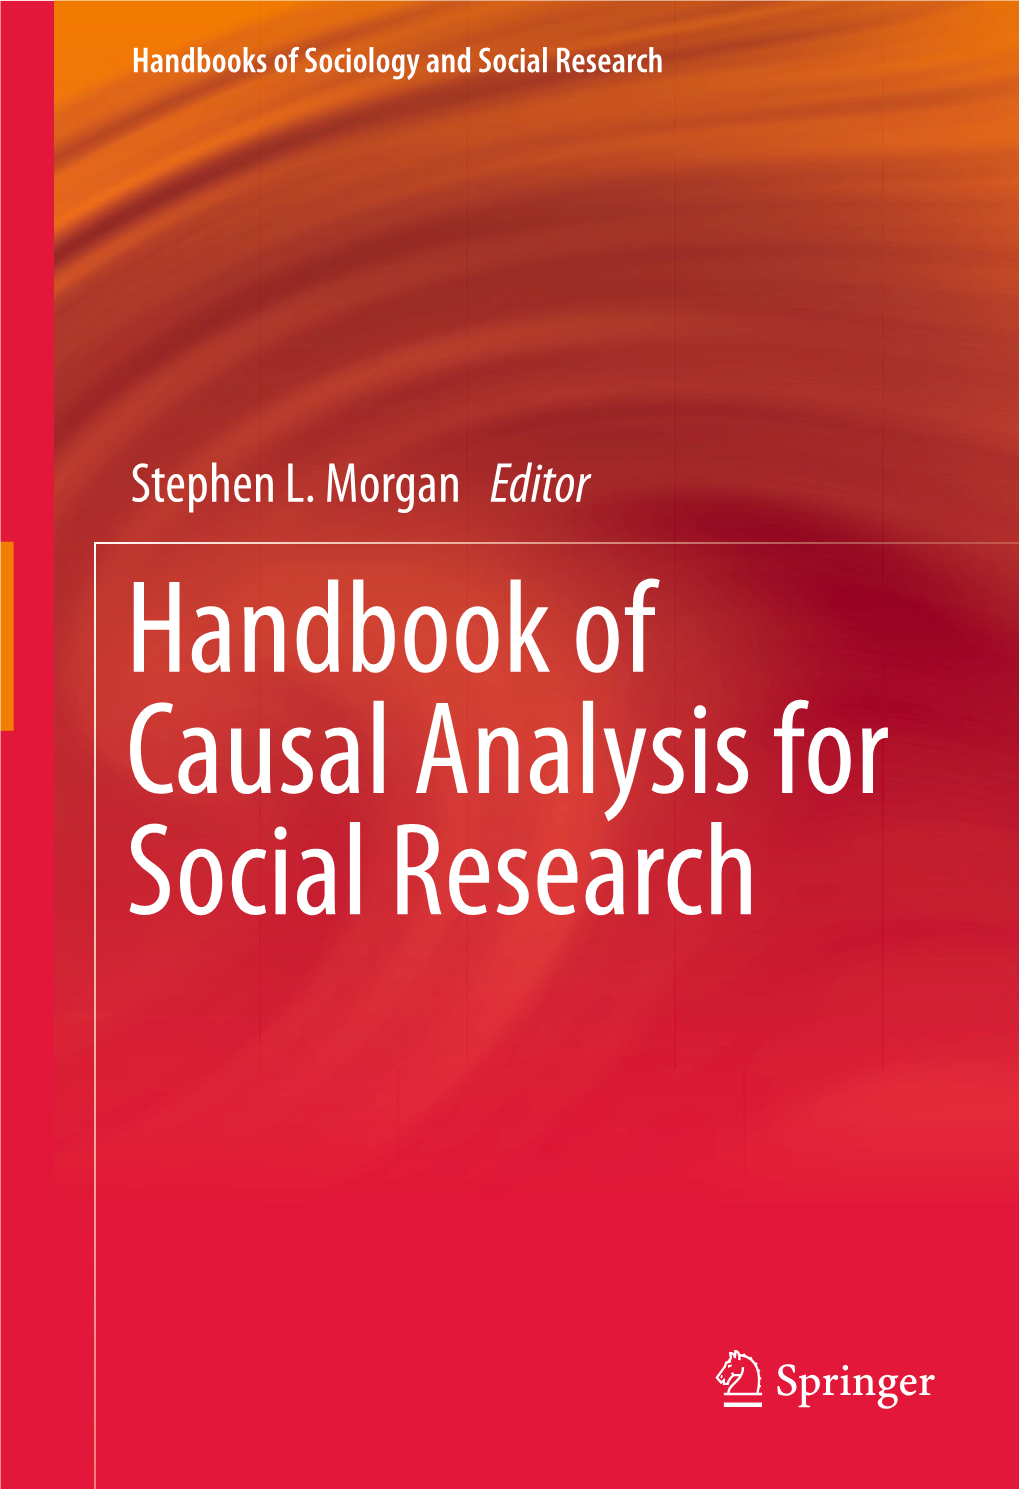 Handbook of Causal Analysis for Social Research Ed